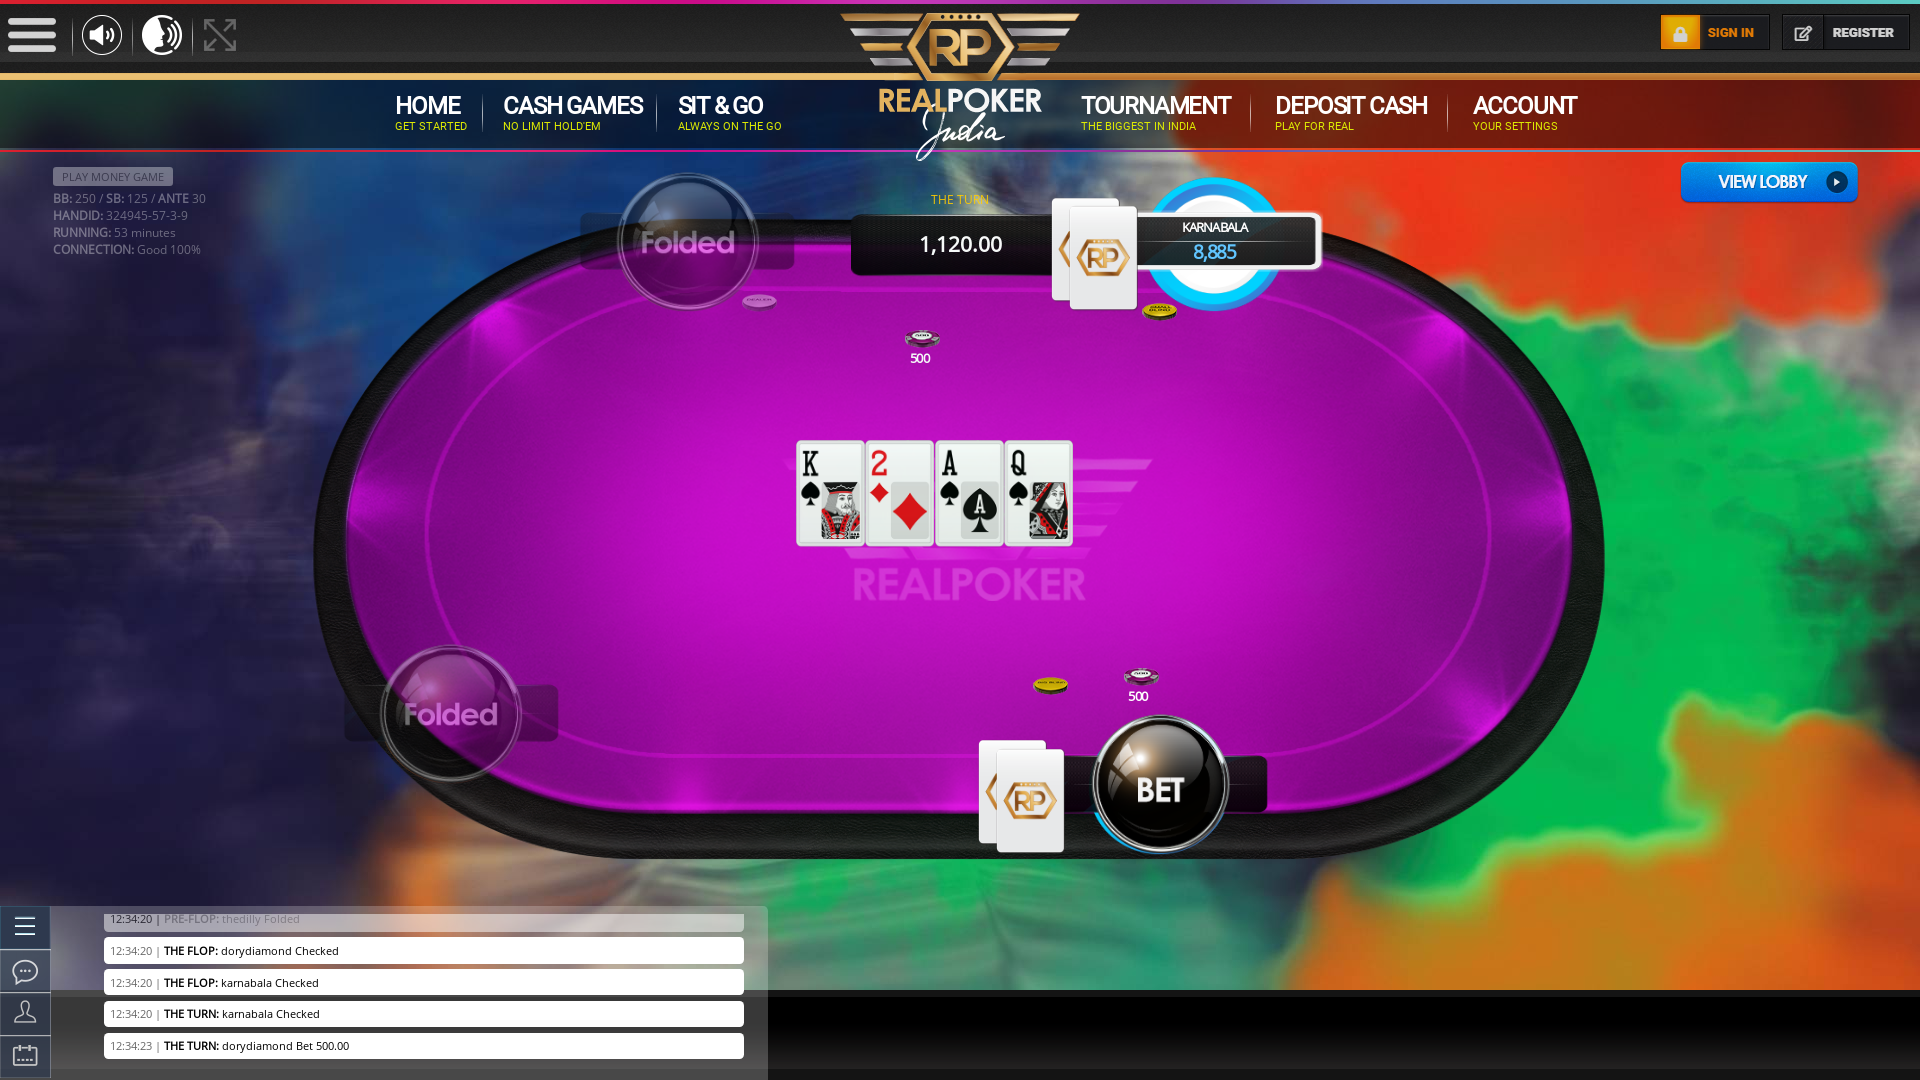 Indian poker on a 10 player table in the 53rd minute